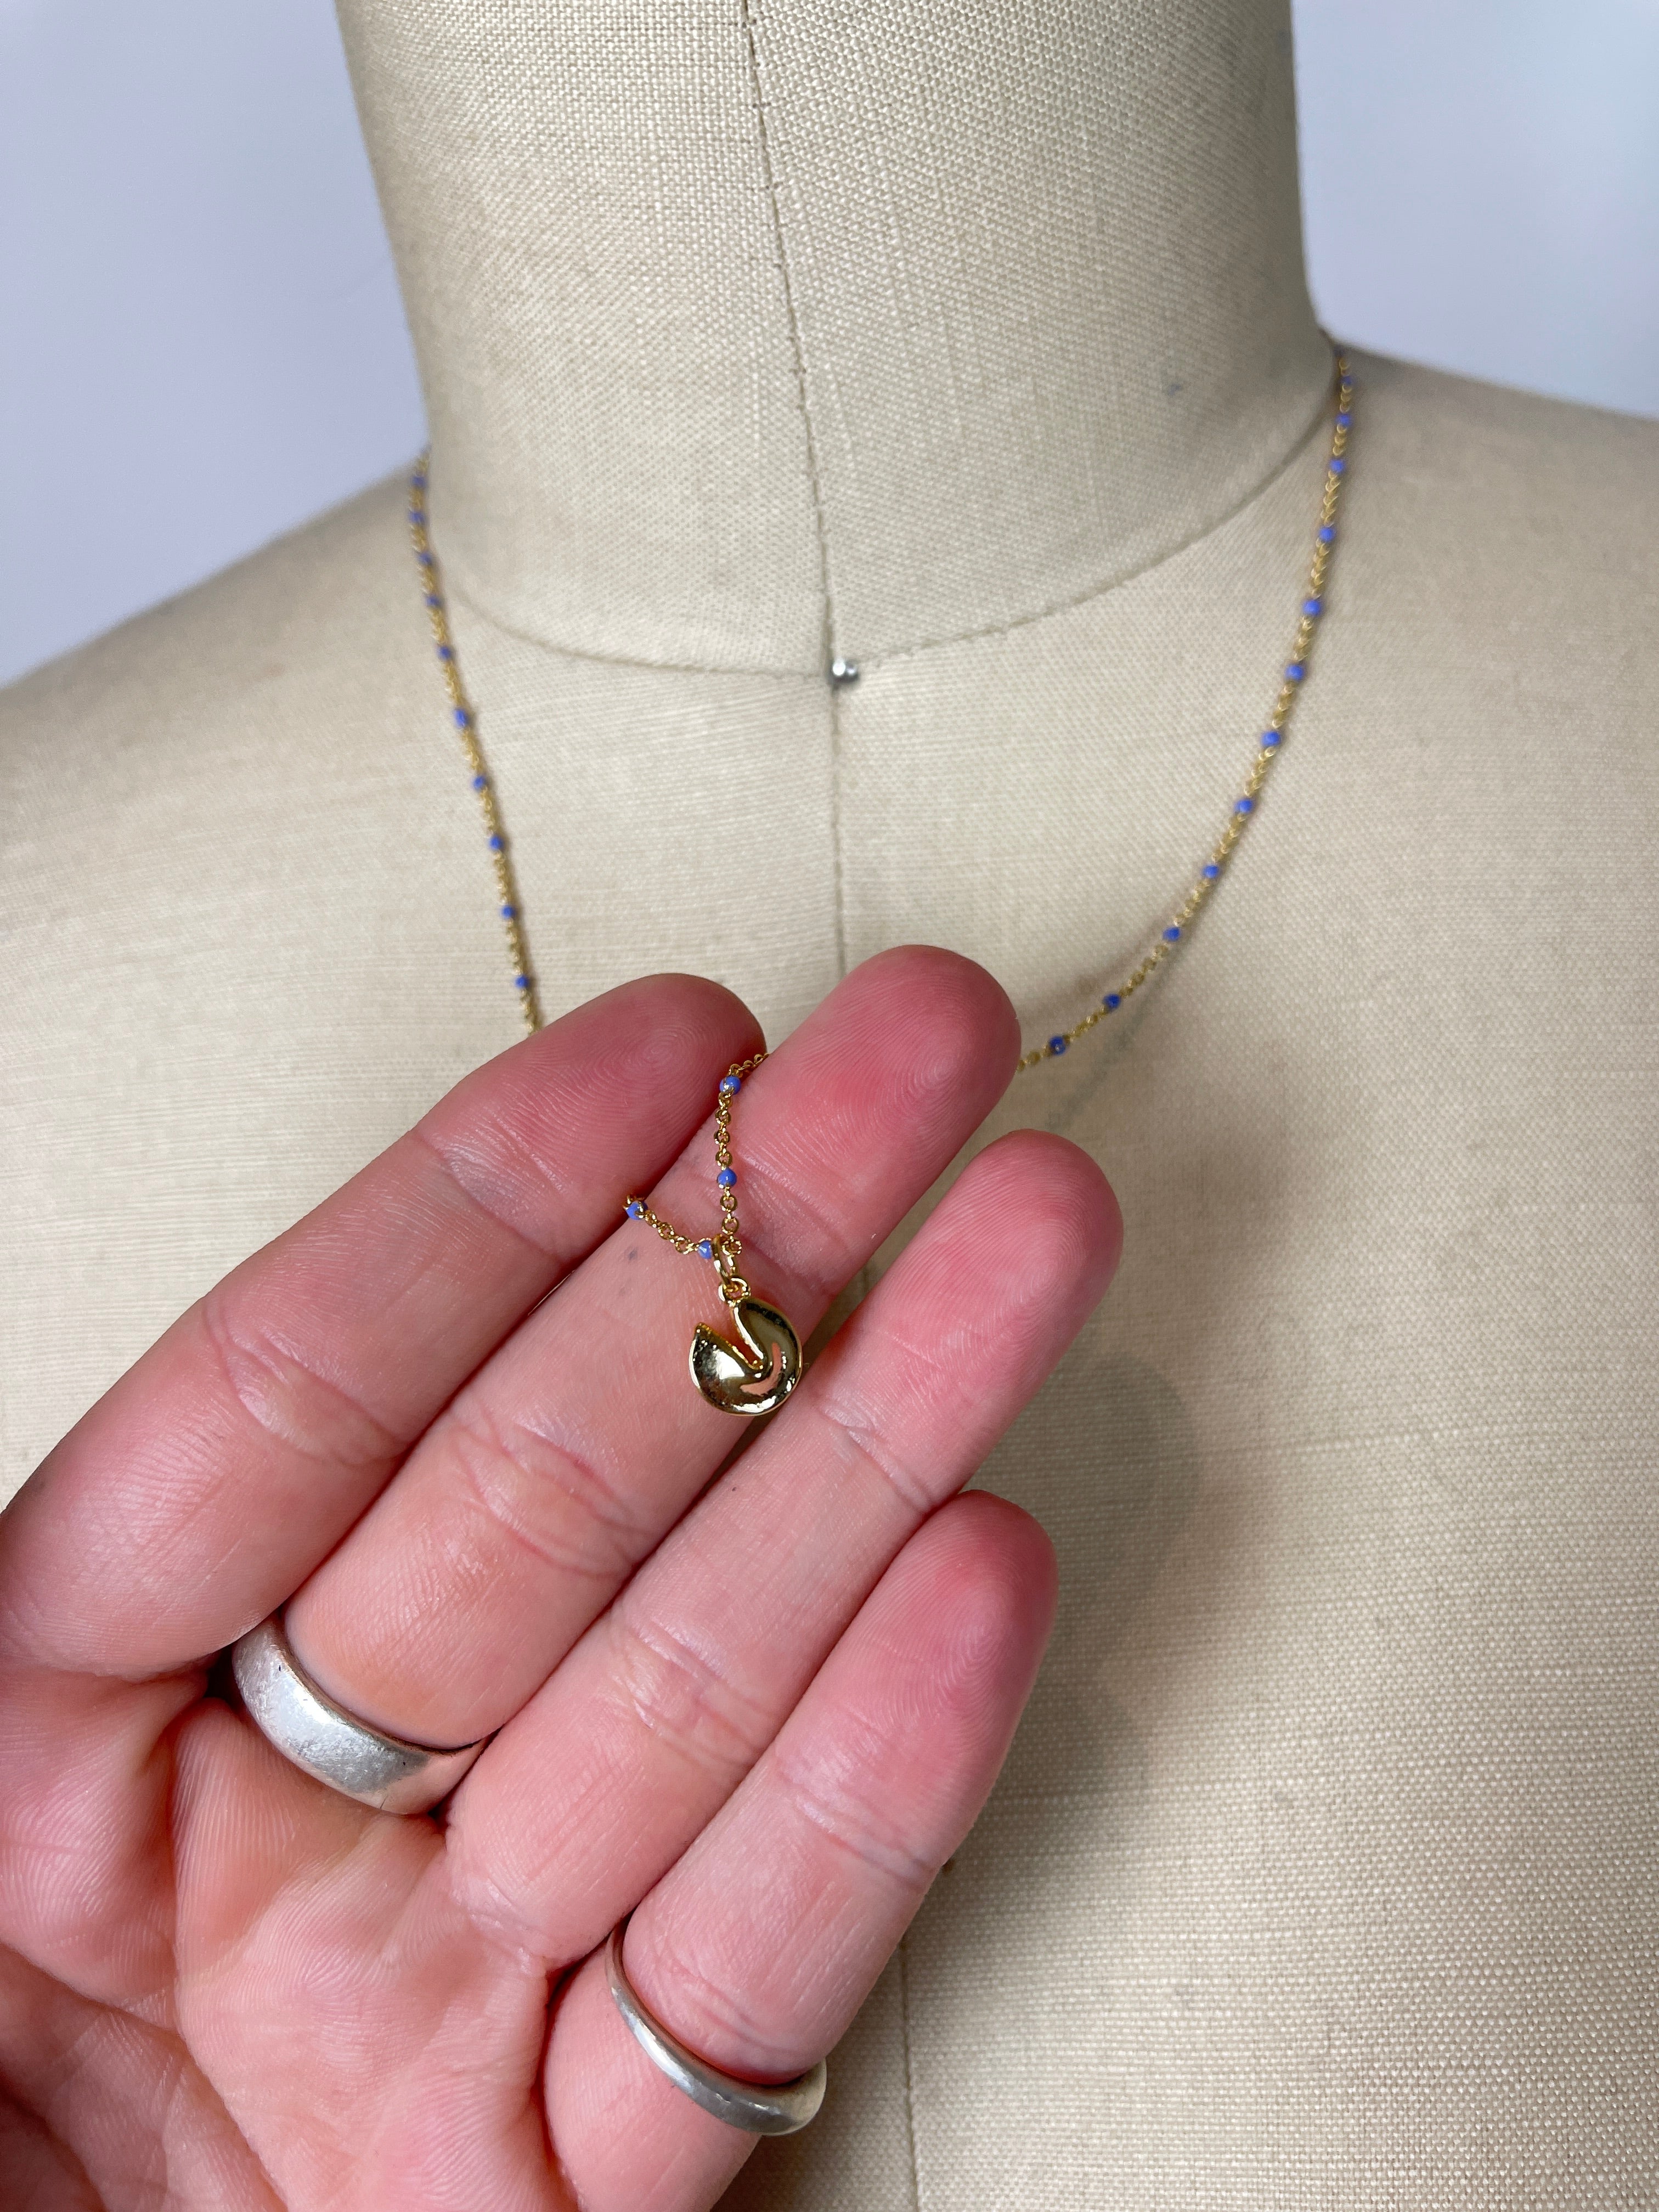 {made} community - Fortune Teller Necklace | Gold & Silver